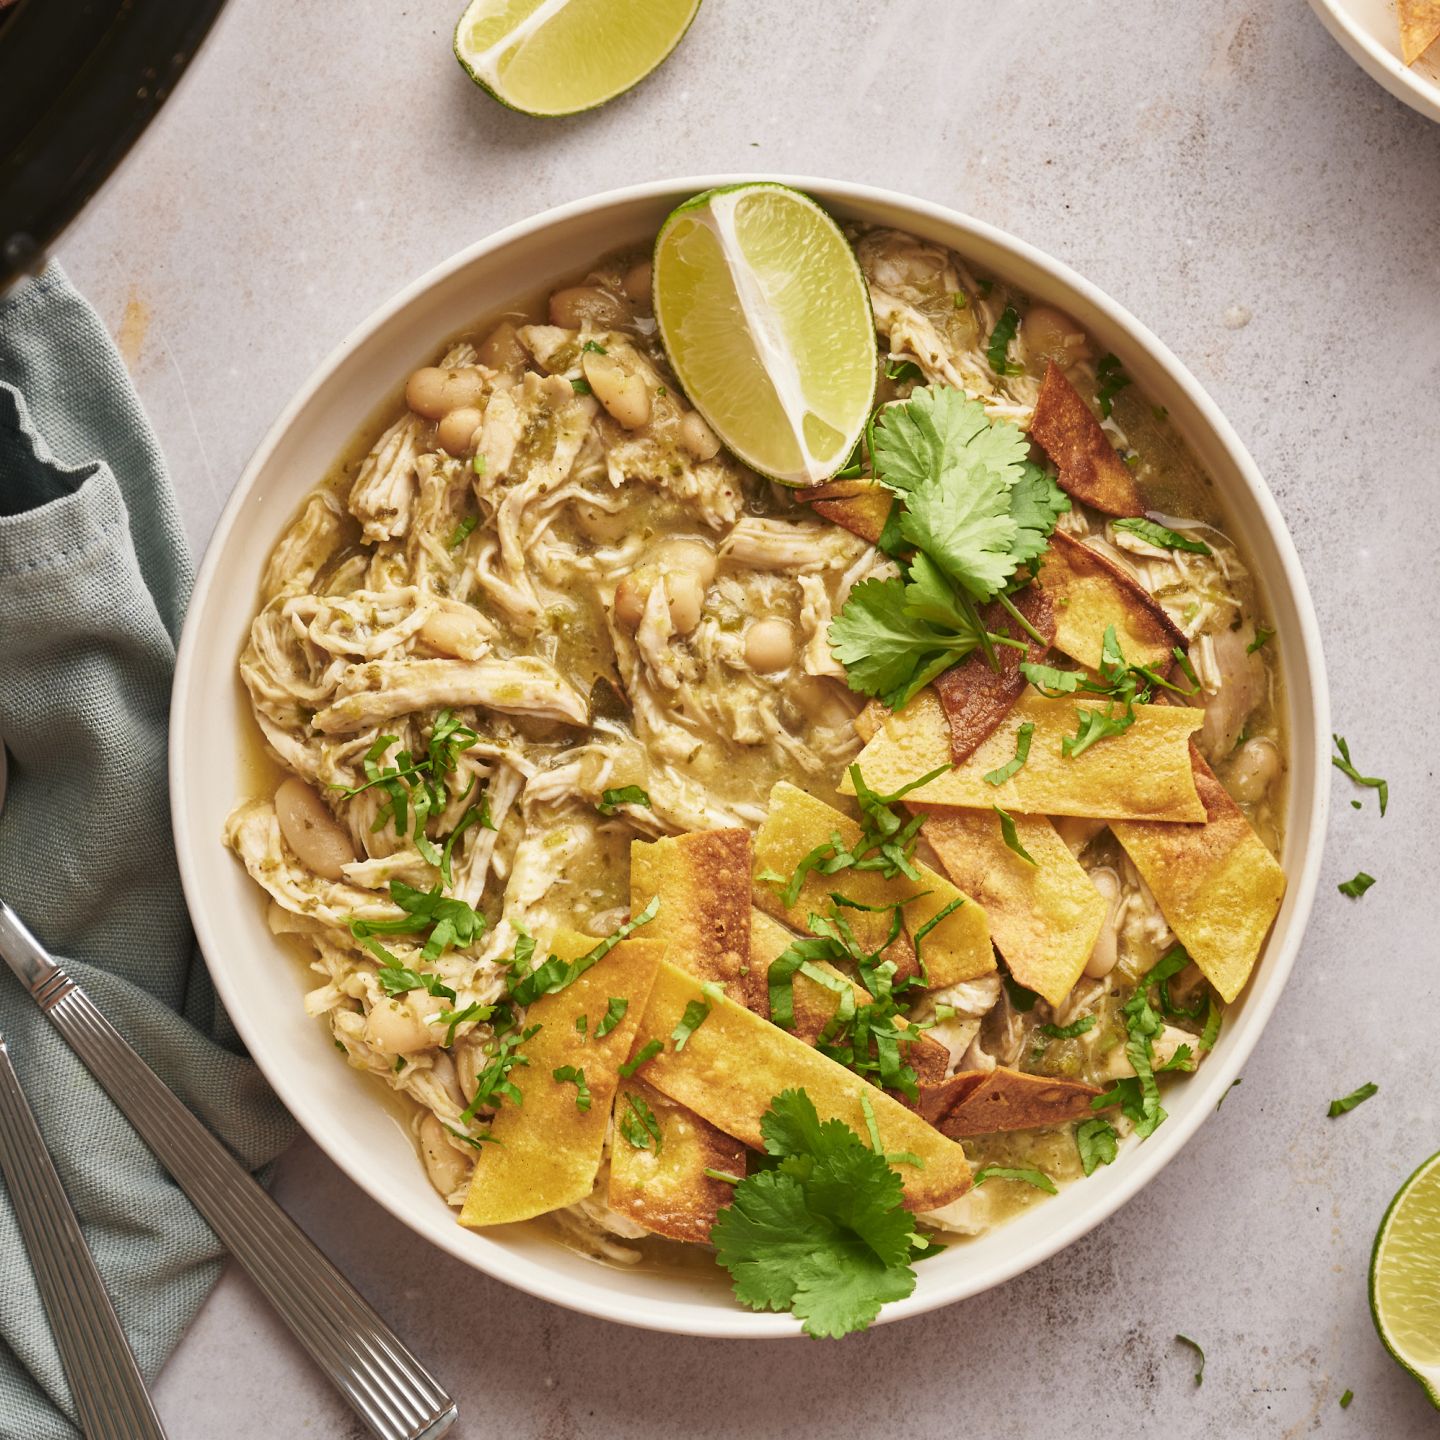 Slow cooker white chicken chili with shredded chicken, green chilies, white beans, tortilla chips, cilantro, and lime.